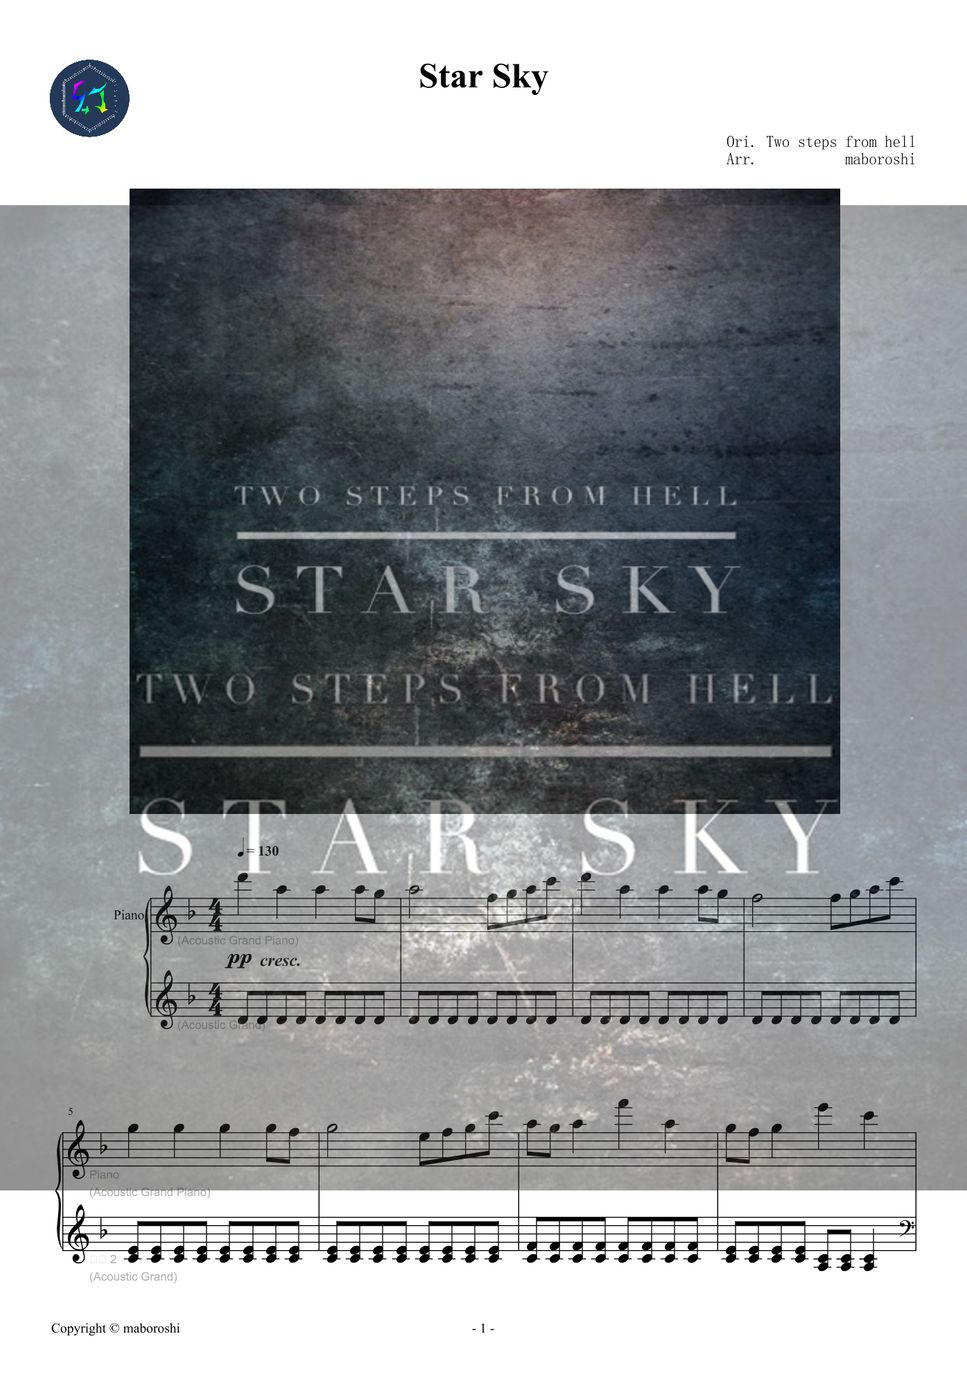 Two Steps From Hell - 《Star Sky》｜ 超震撼神曲!! / Piano sheet by maboroshi